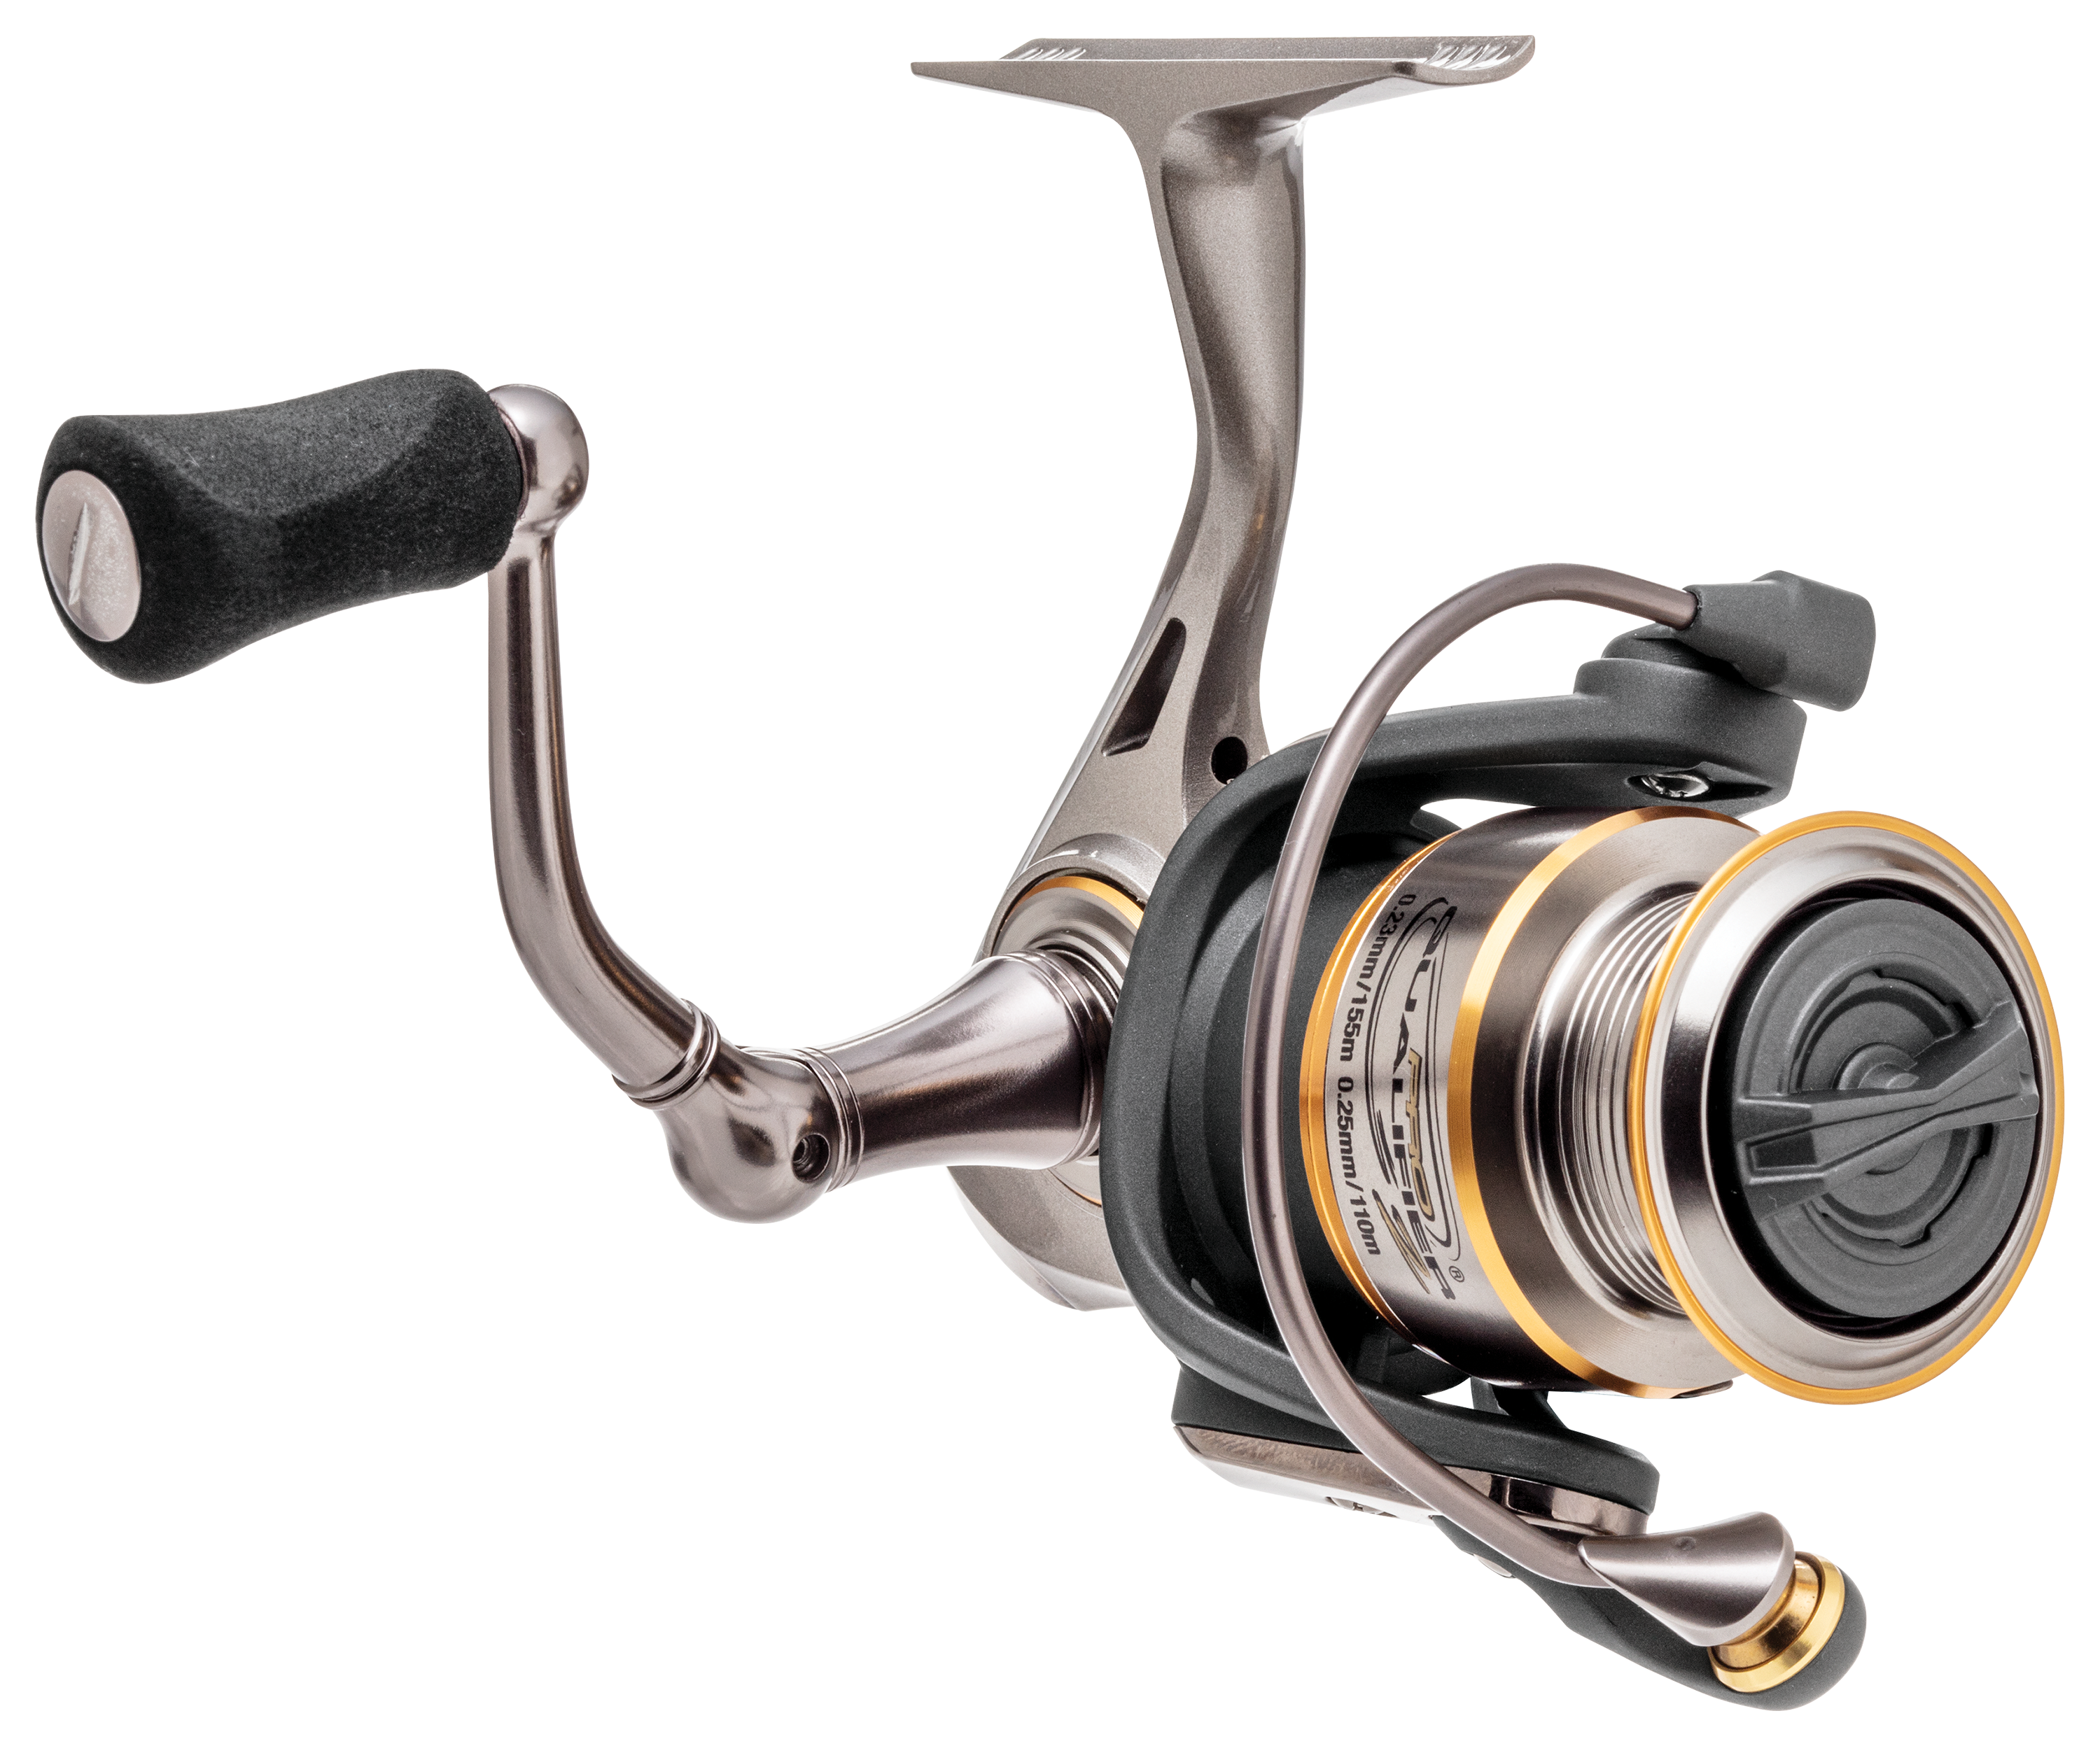 Bass Pro Shop Qualifier QF6635 Spinning Reel,Nice